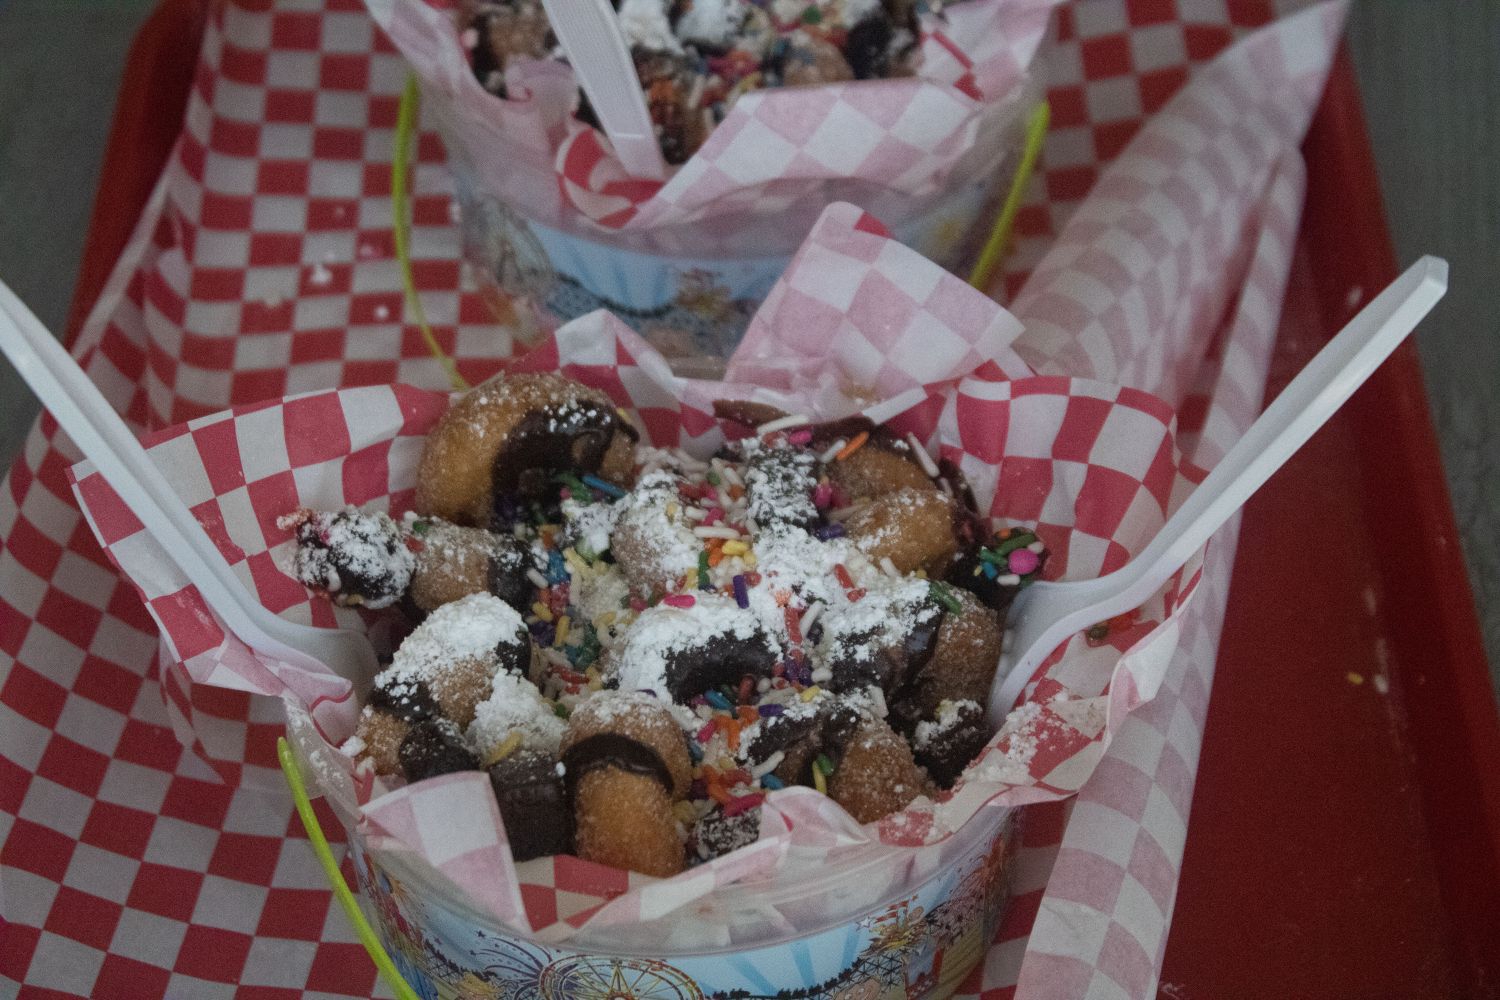 Cosmic Brownie Explosion Mini Donuts from The Donut Family